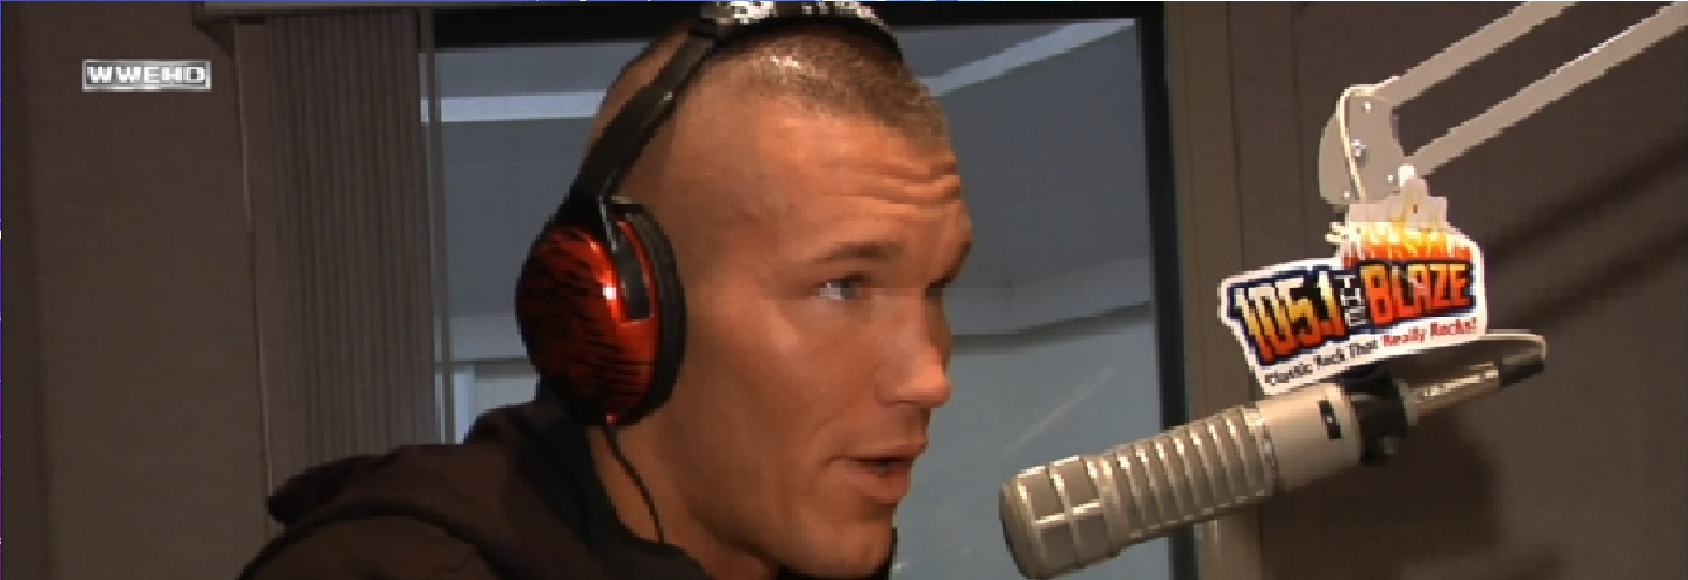 download song randy orton nothing you can say 320kbps